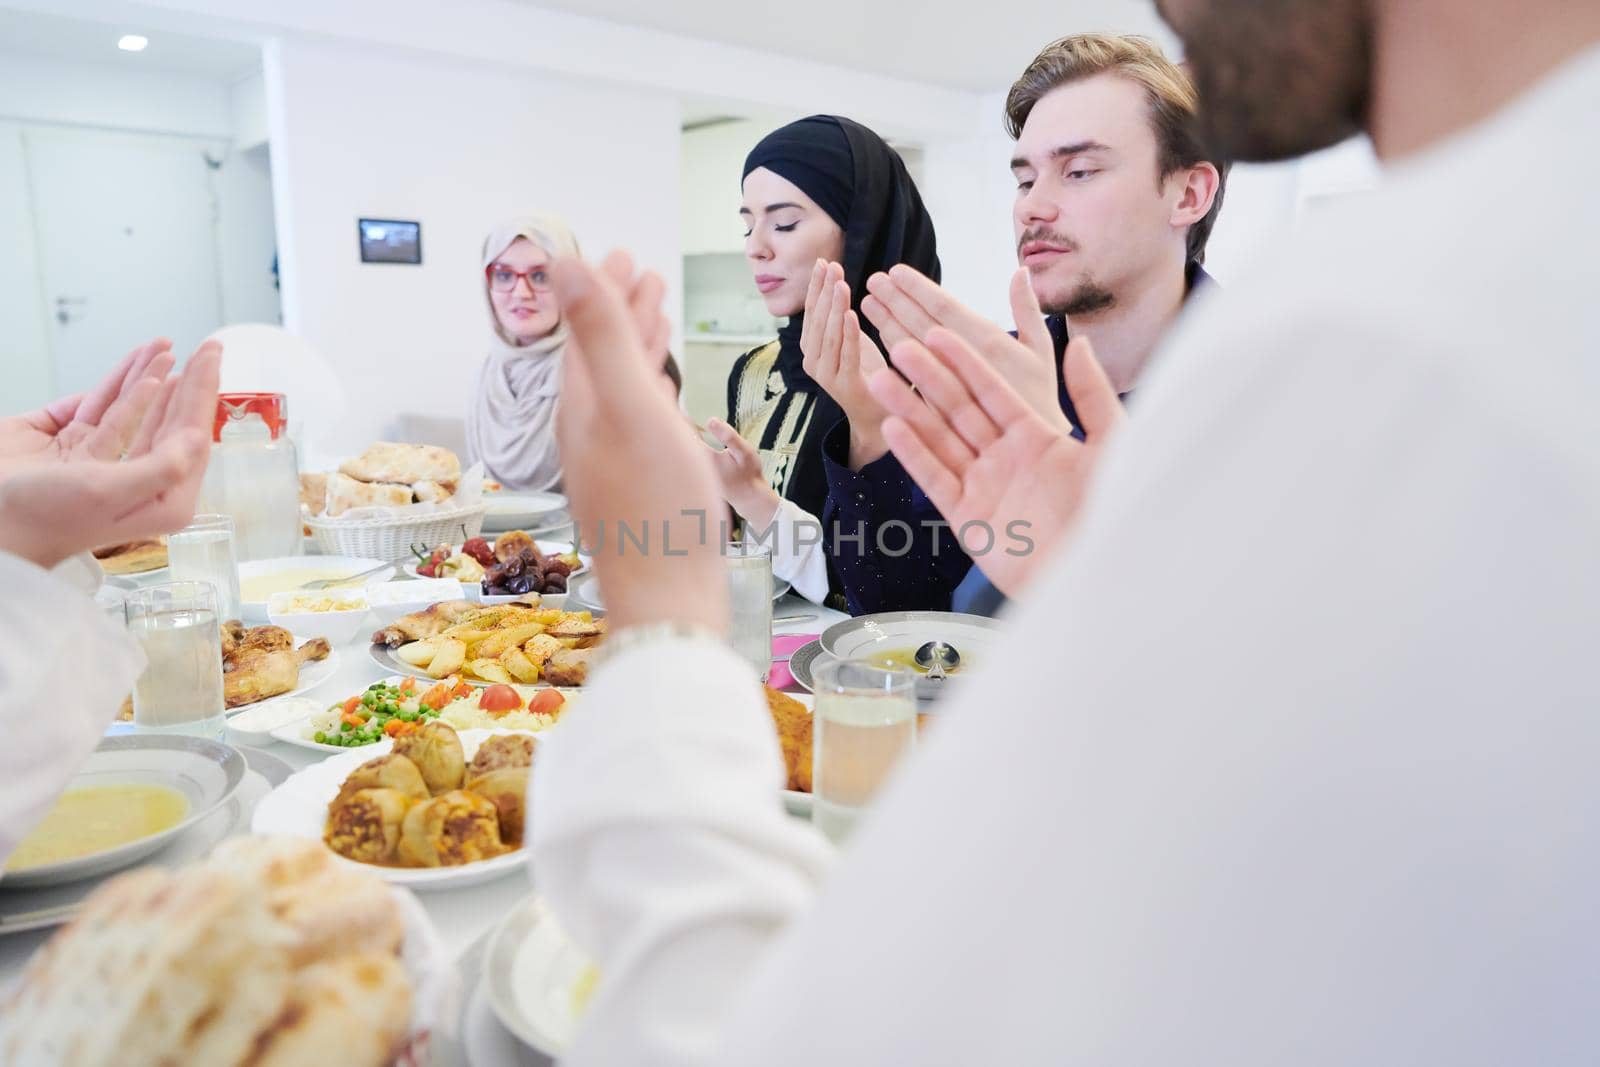 Eid Mubarak Muslim people praying before iftar dinner. Eating traditional food during Ramadan feasting month at home. The Islamic Halal Eating and Drinking at modern western Islamic family